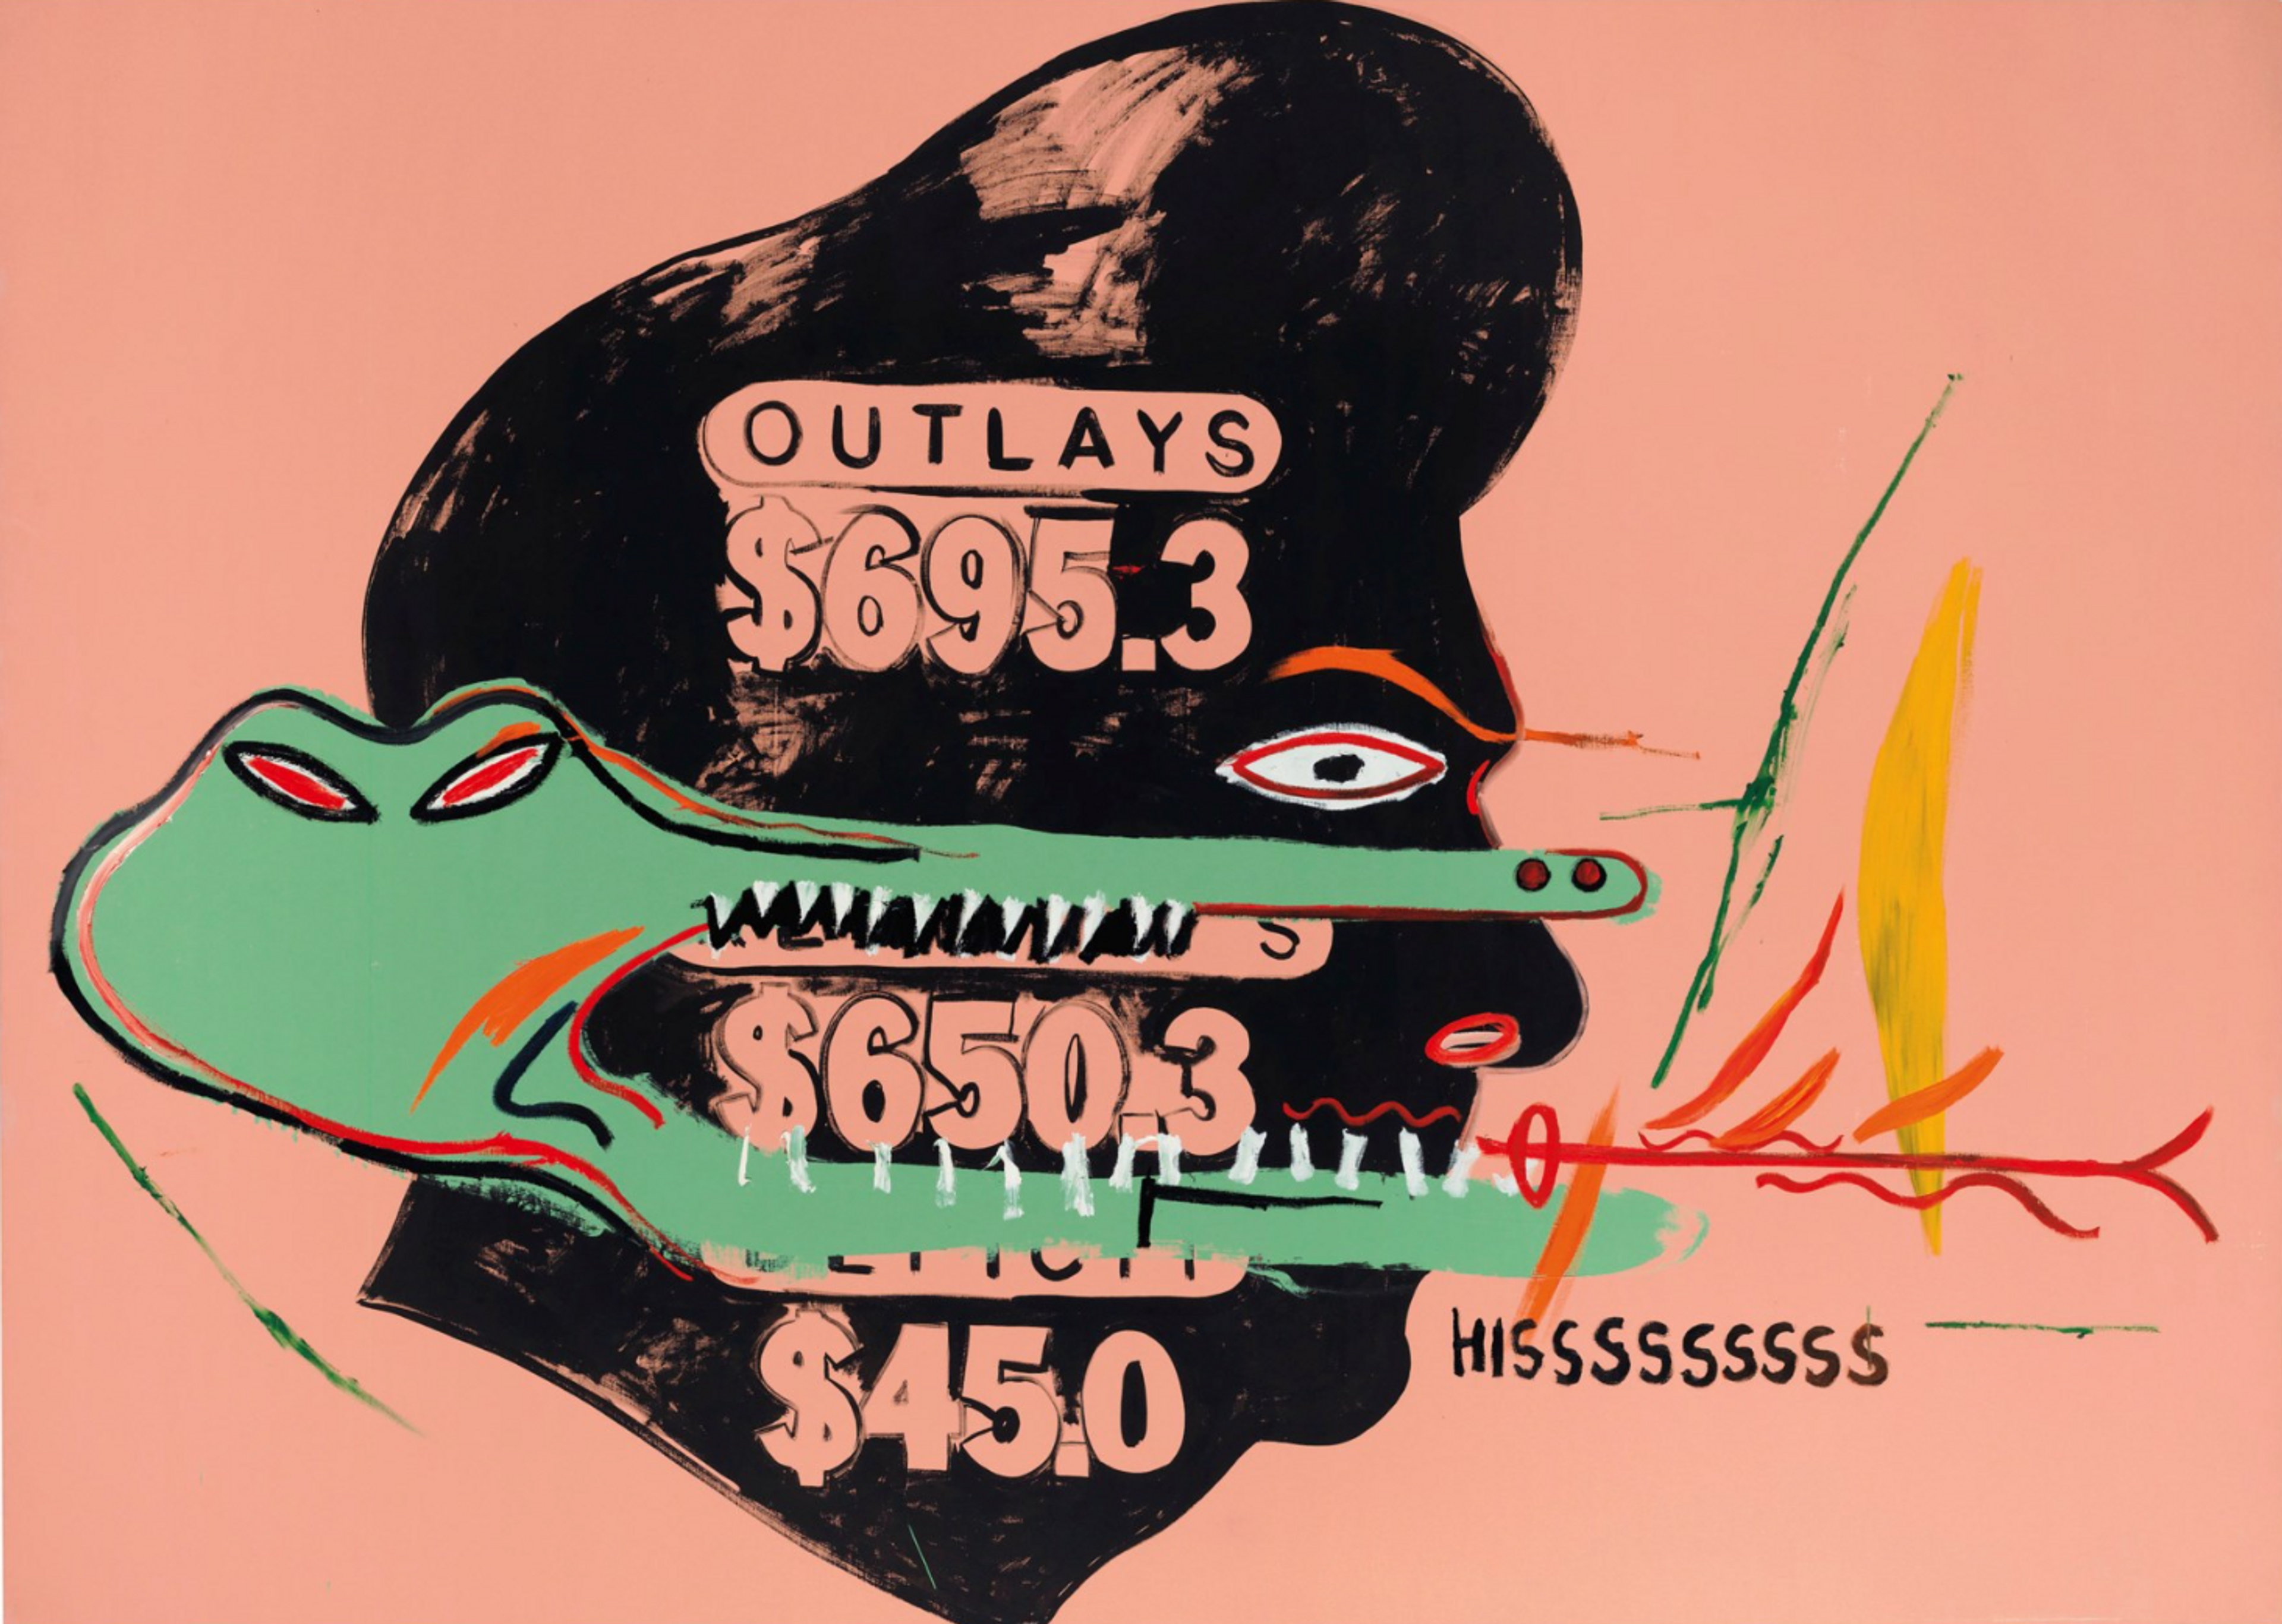 Outlays Hisssssssss (Collaboration #22) by Andy Warhol and Jean-Michel Basquiat